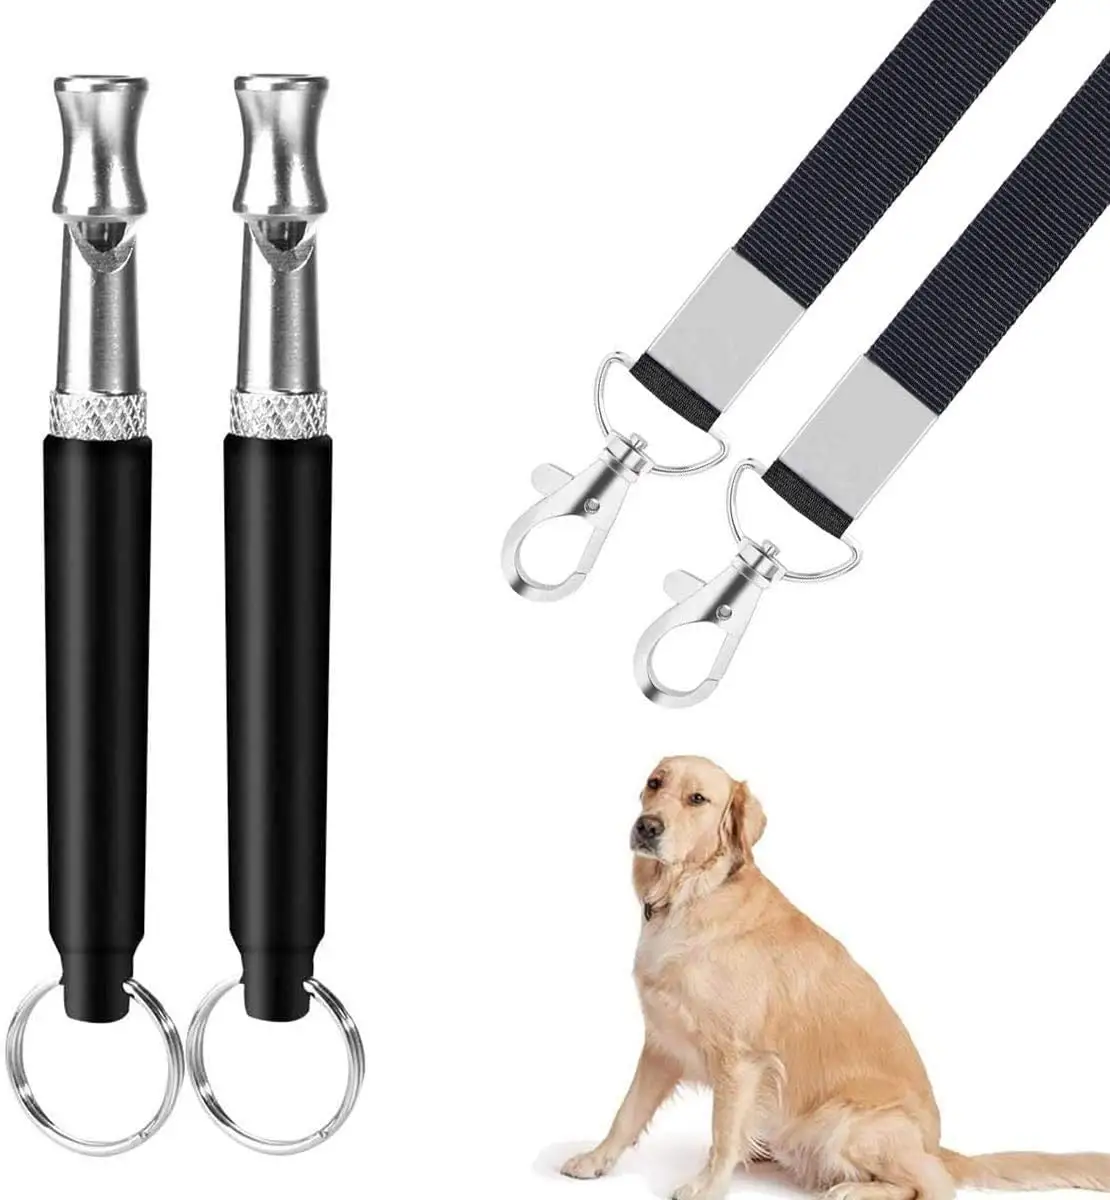 Fondopeted Adjustable Silent Pitch Ultrasonic Control Tool Pet Doged Training Whistle with Black Strap Lanyard